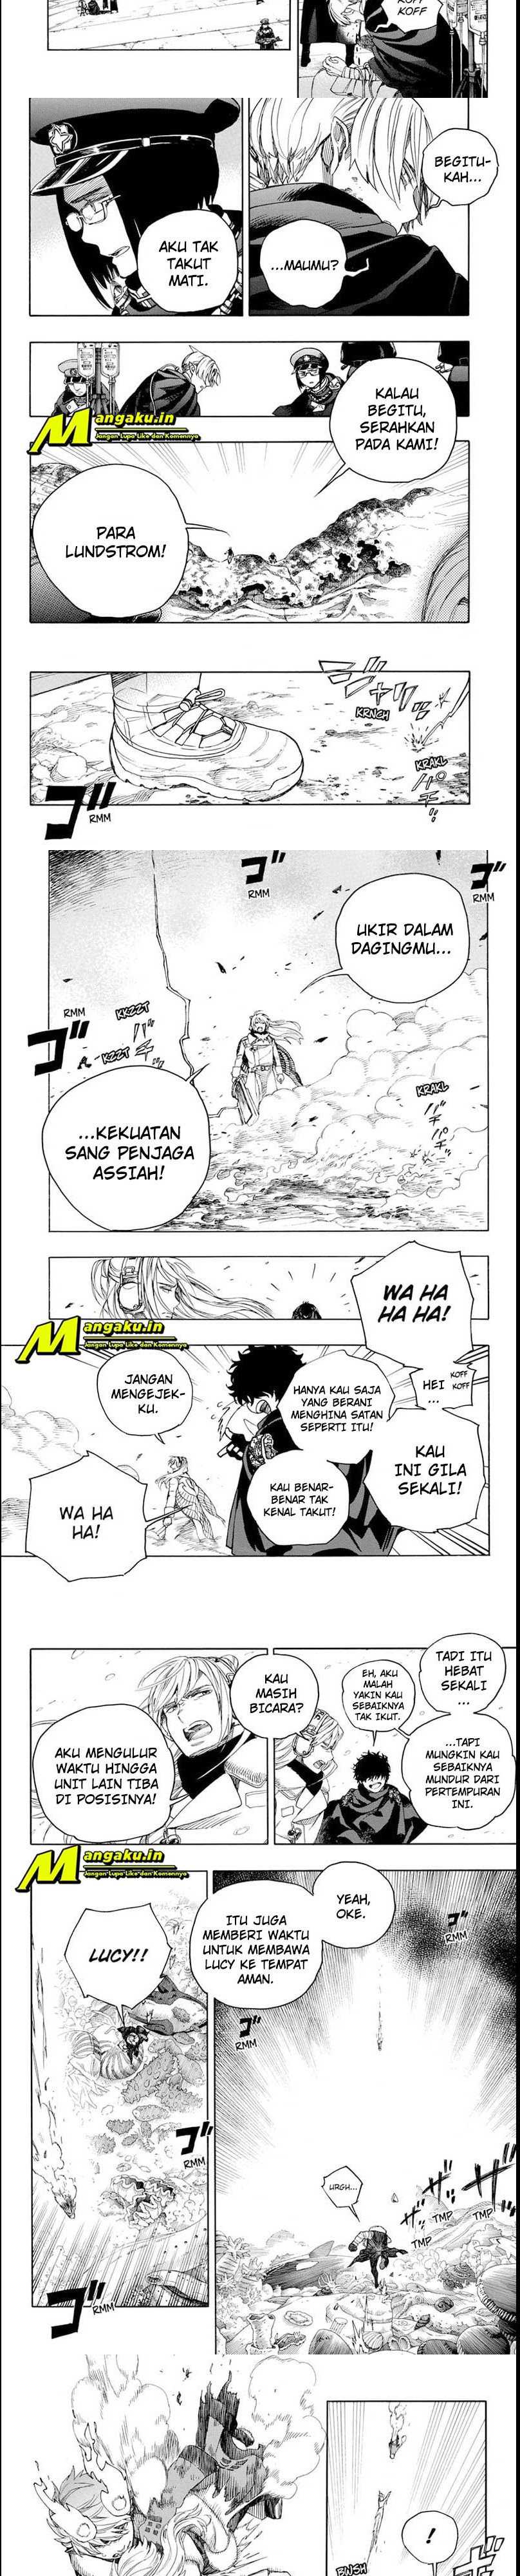 Ao No Exorcist Chapter 134.1